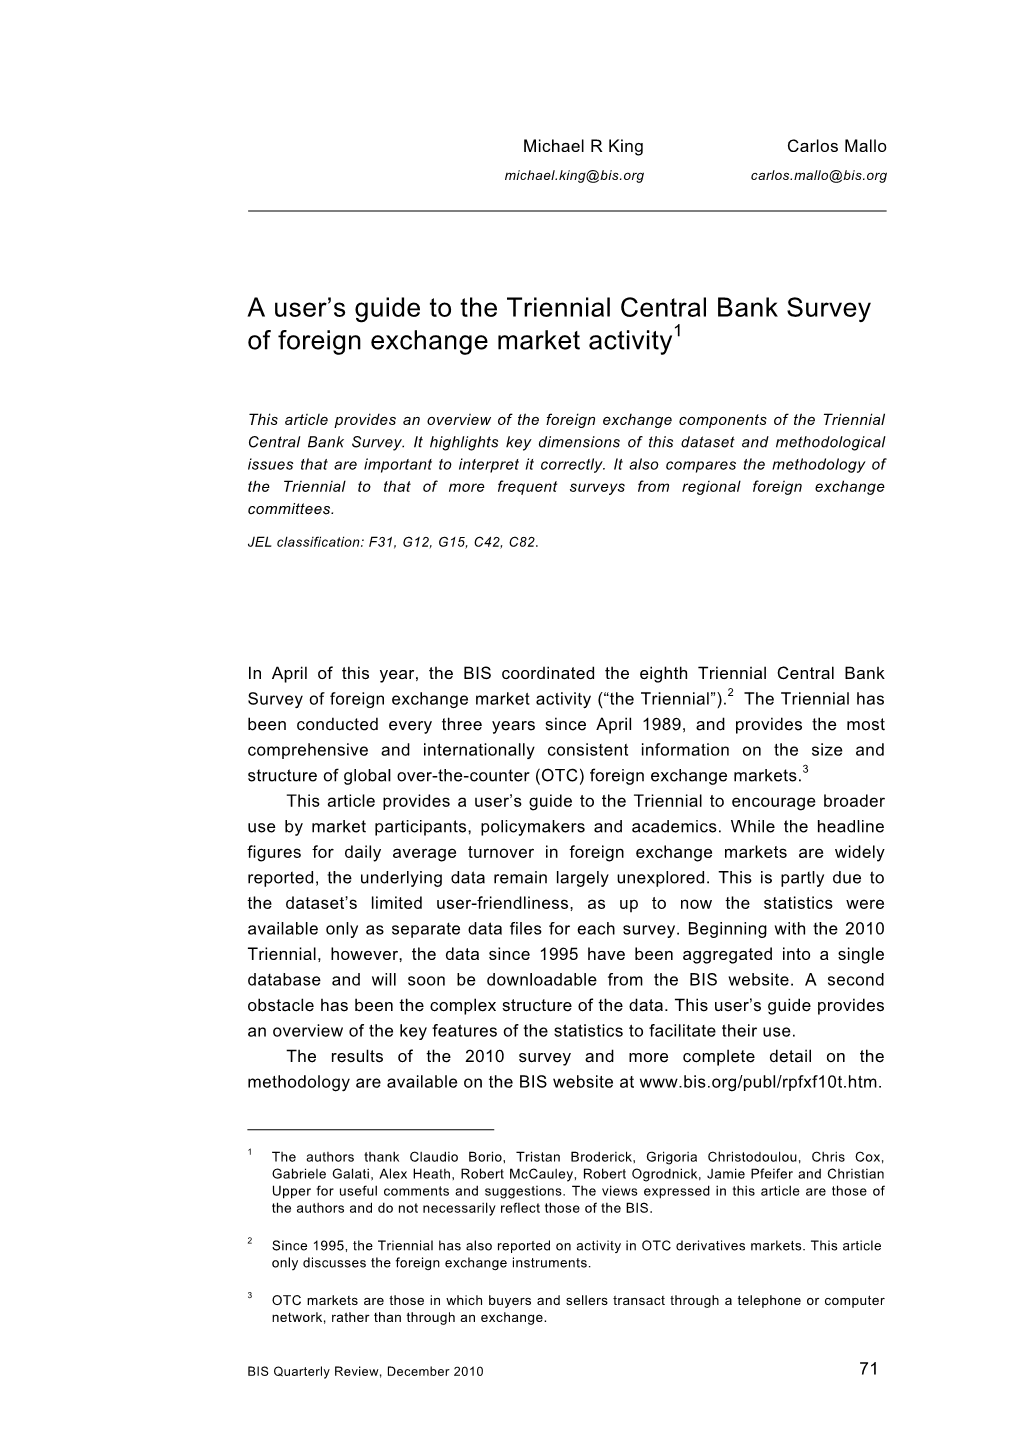 A User's Guide to the Triennial Central Bank Survey of Foreign Exchange